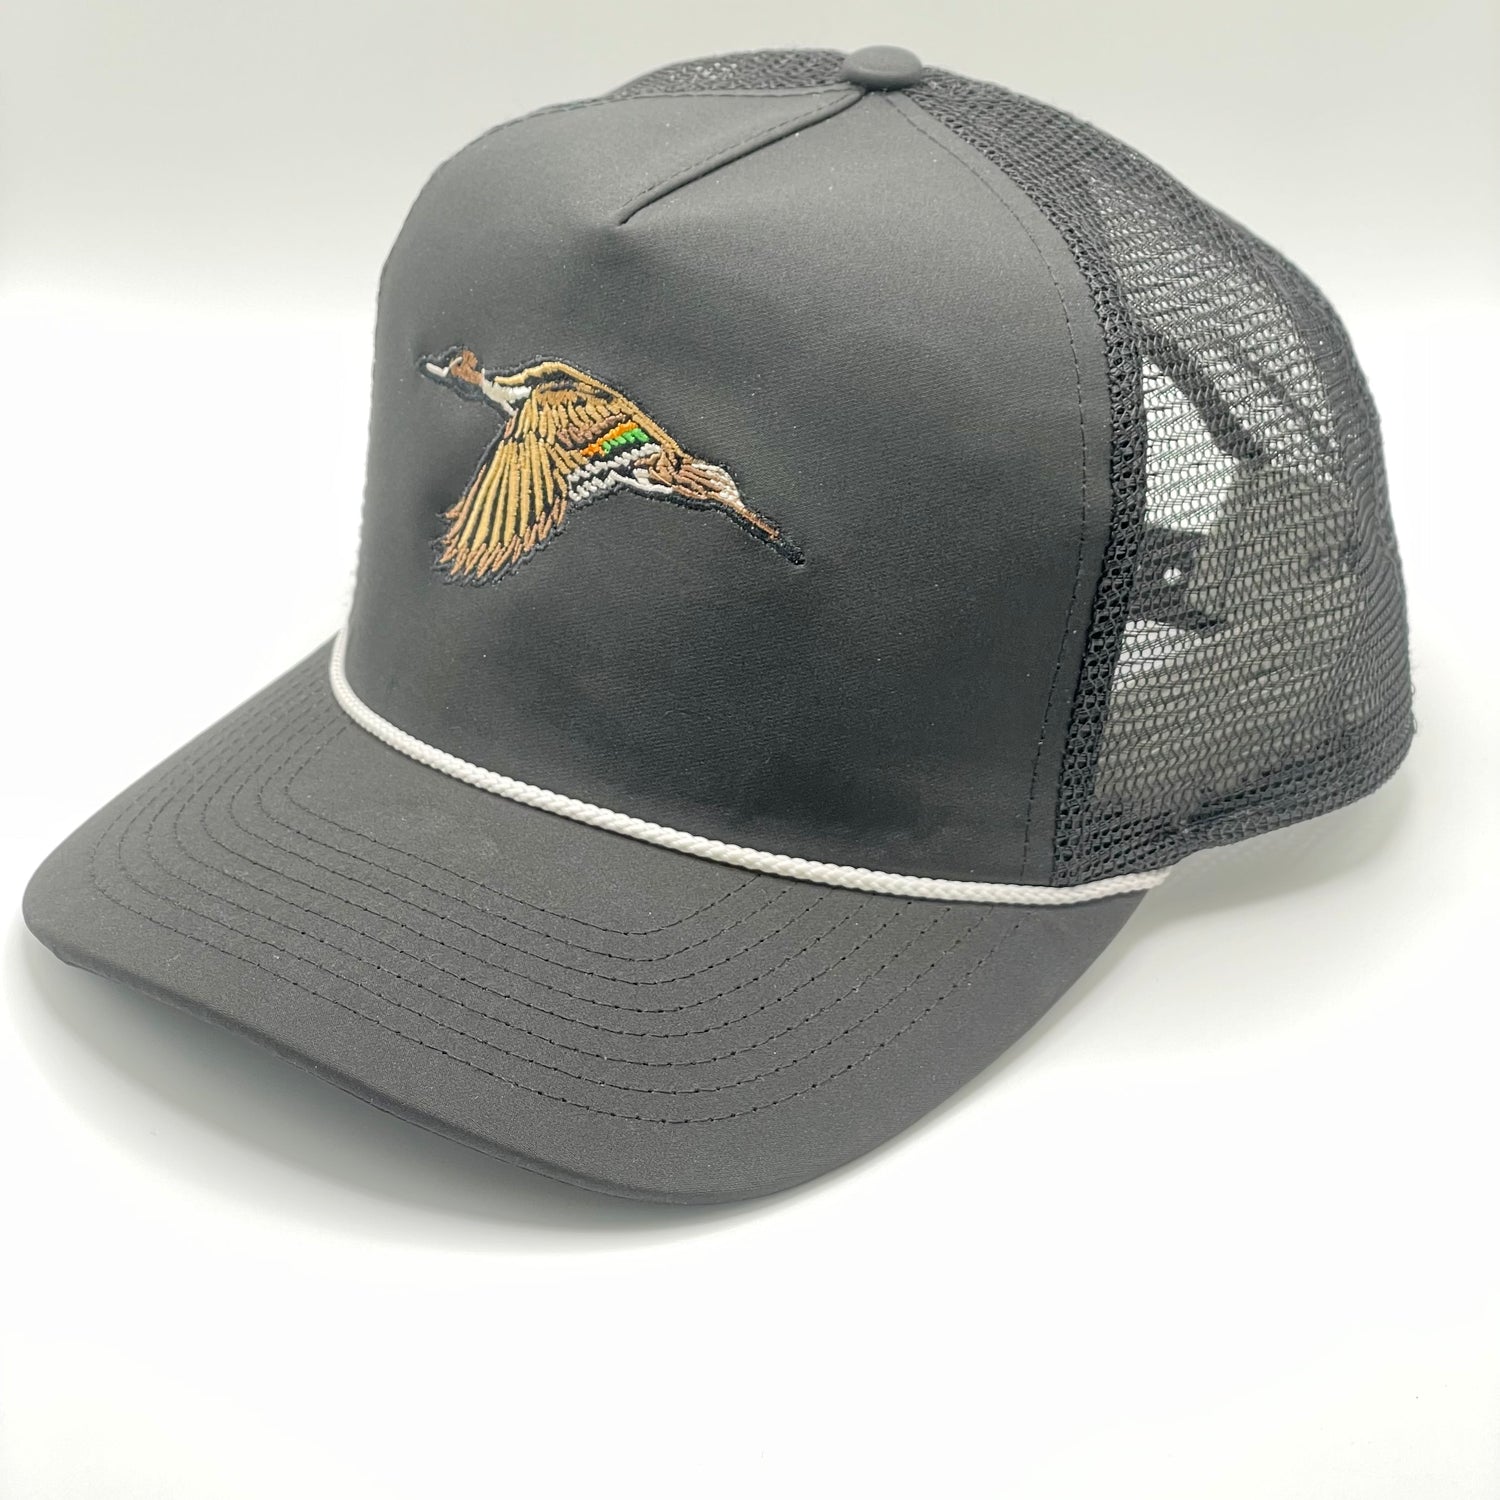 Embroidered Bird Hats